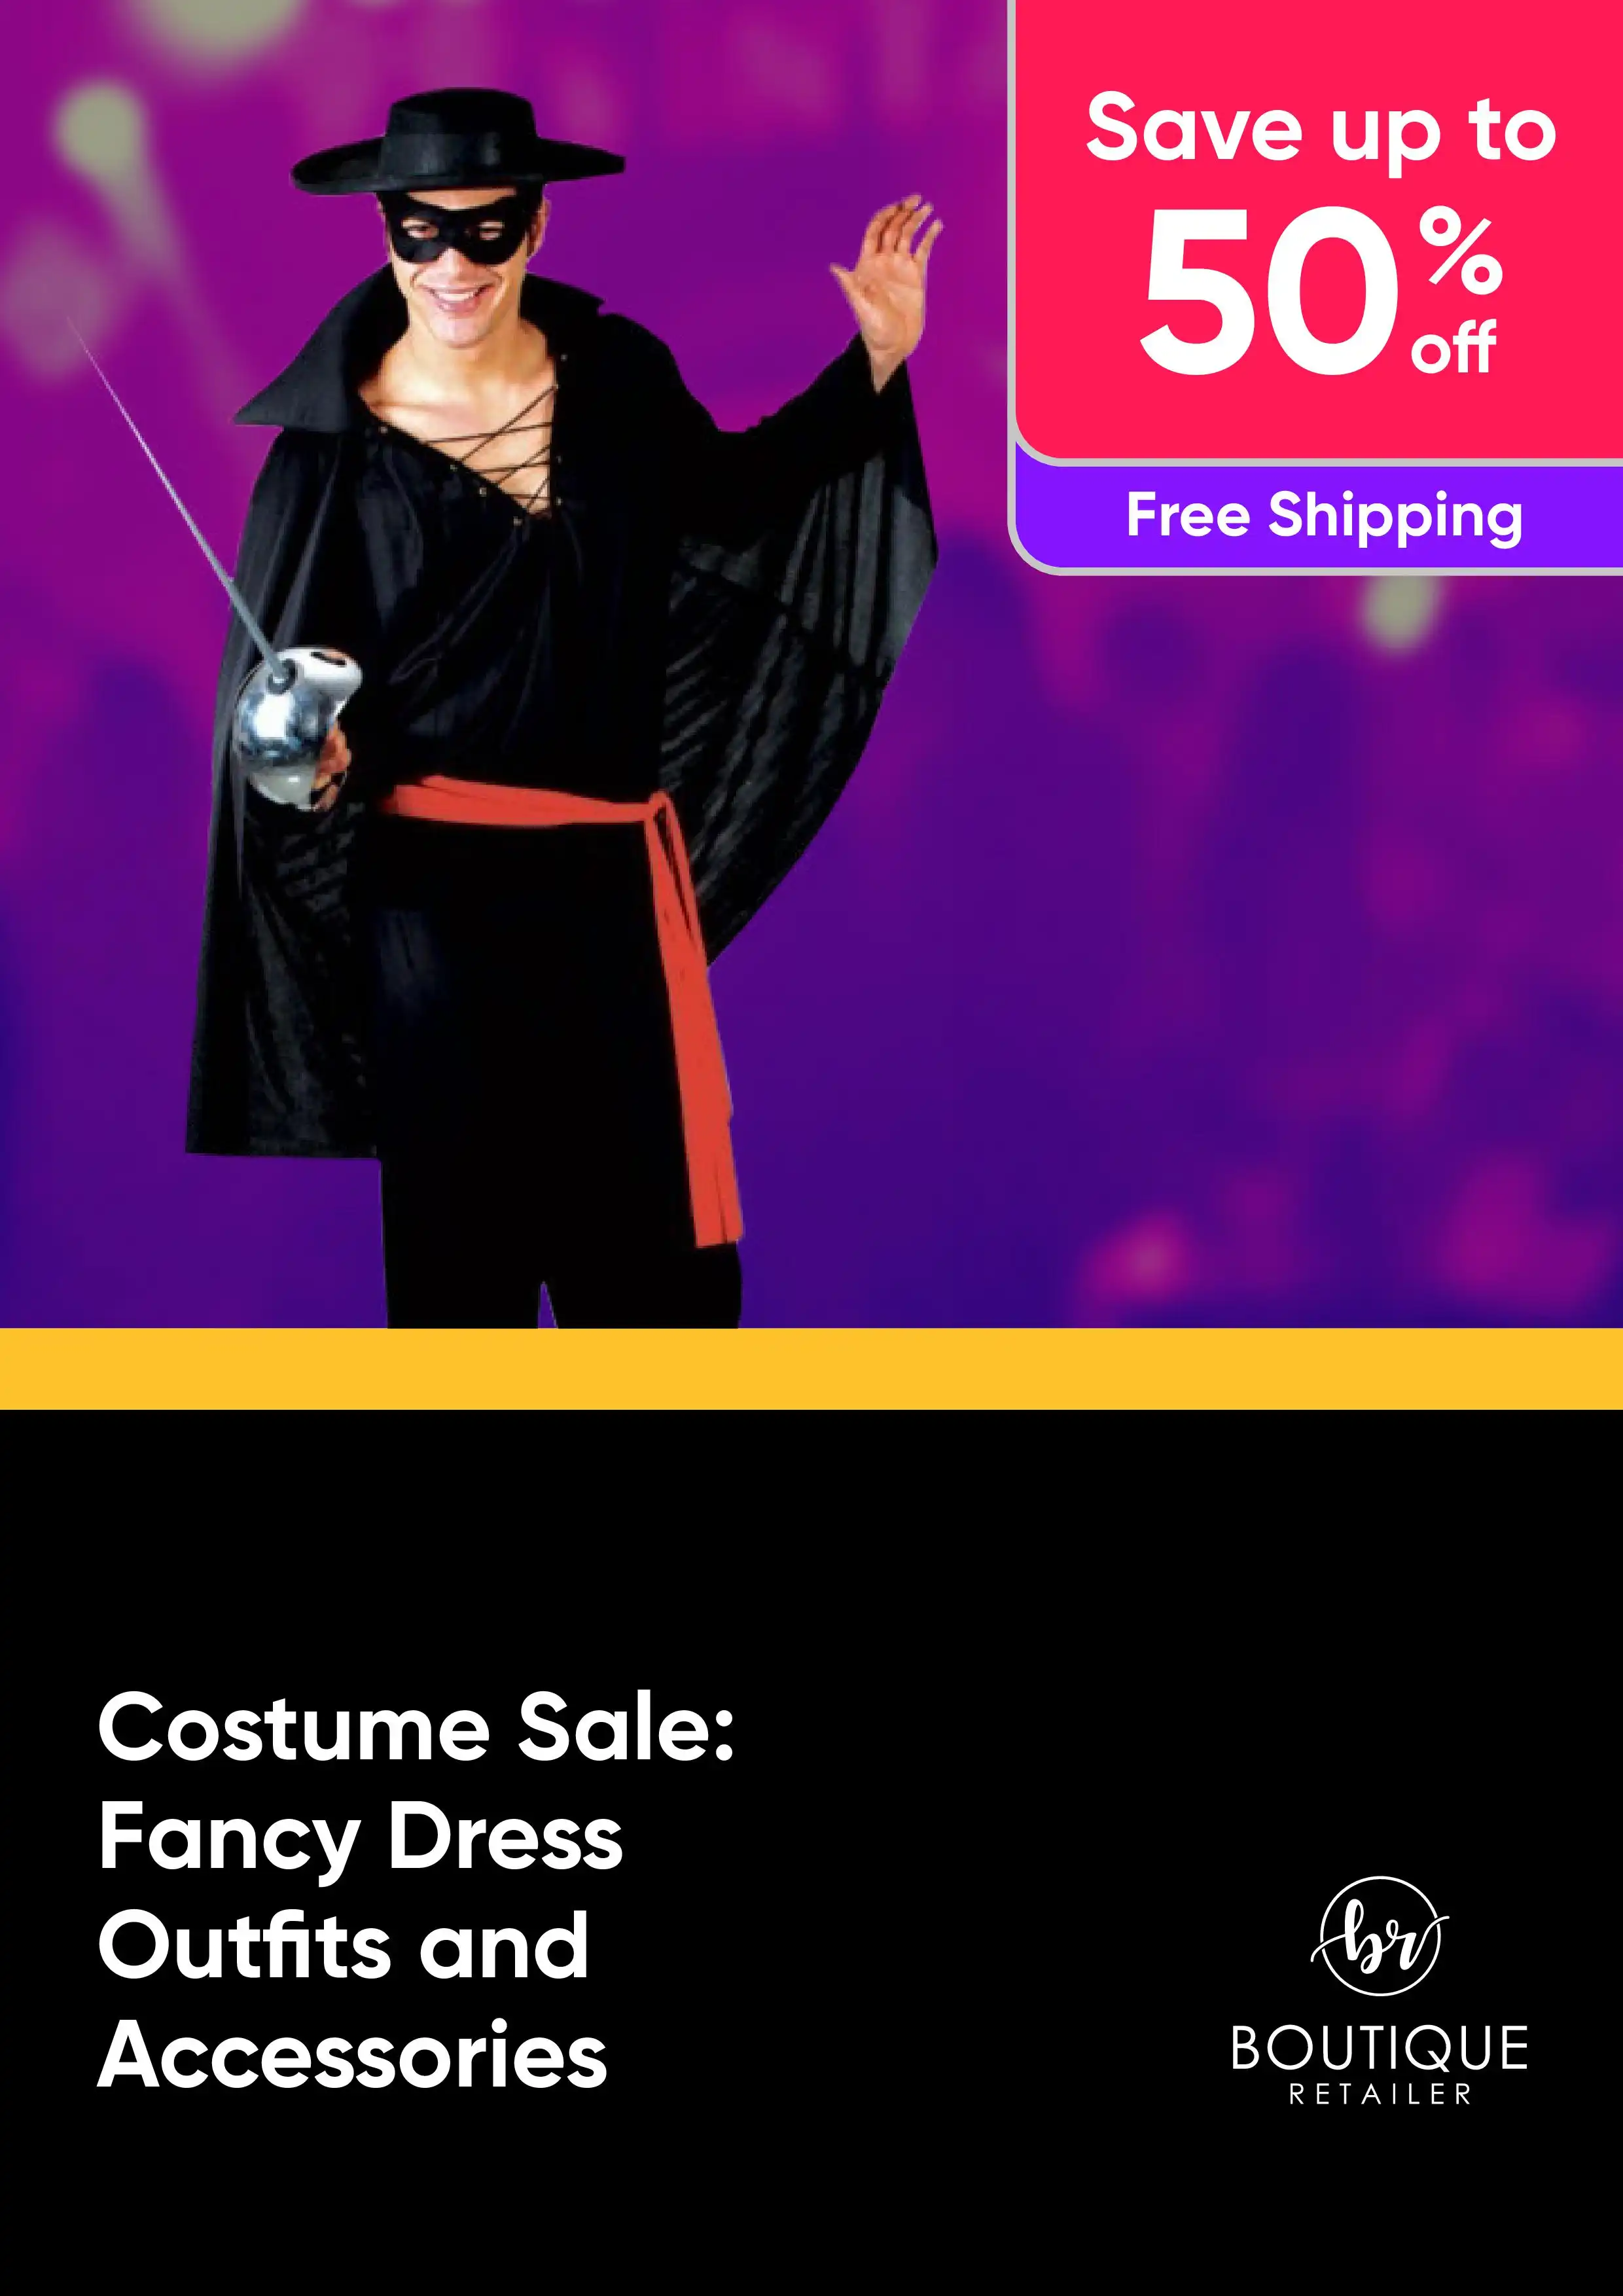 Costume Sale - Fancy Dress Outfits and Accessories - up to 50% off